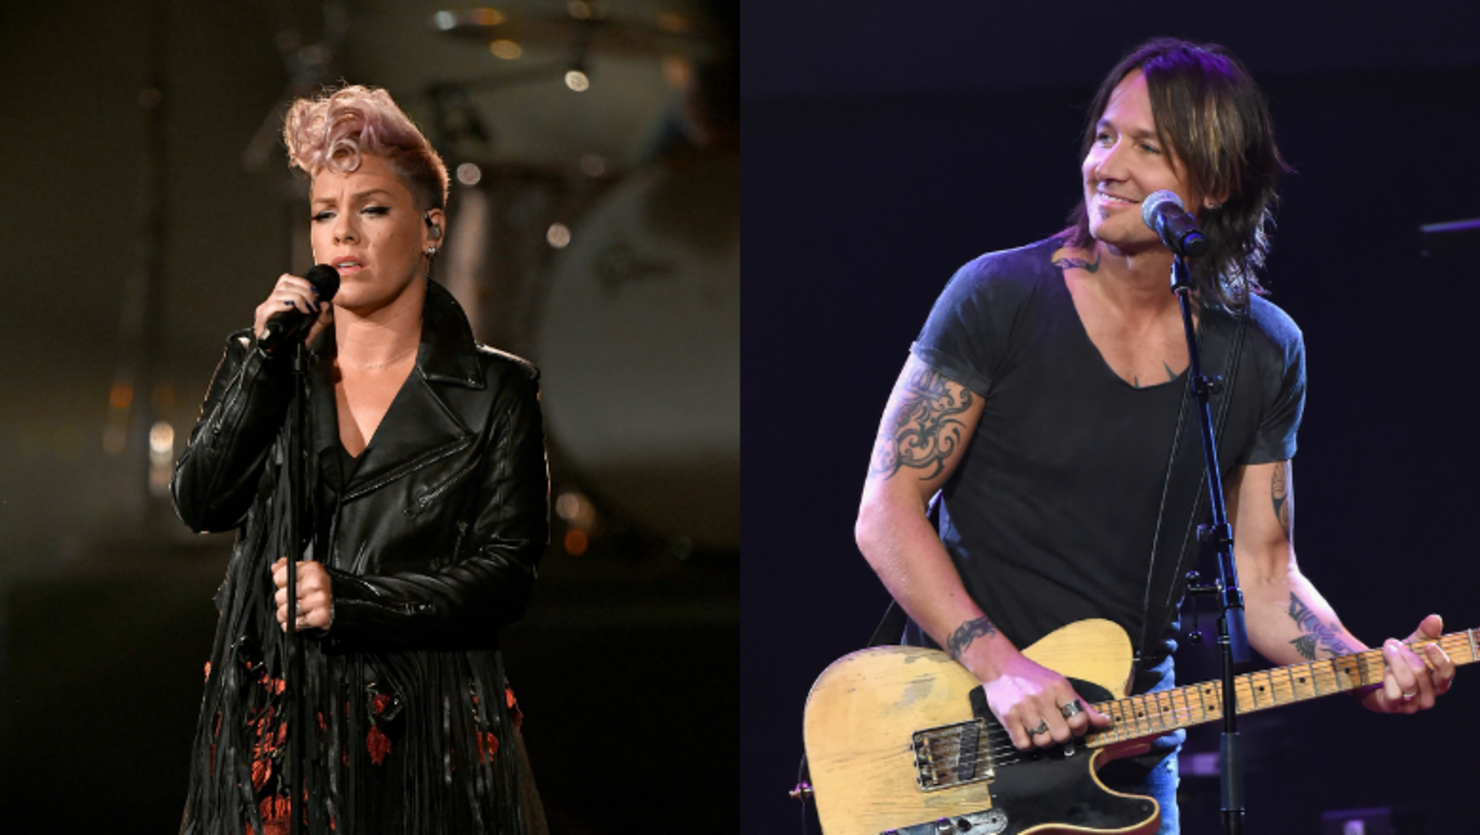 Keith Urban And P!nk To Debut 'One Too Many' Duet At 2020 ACM Awards